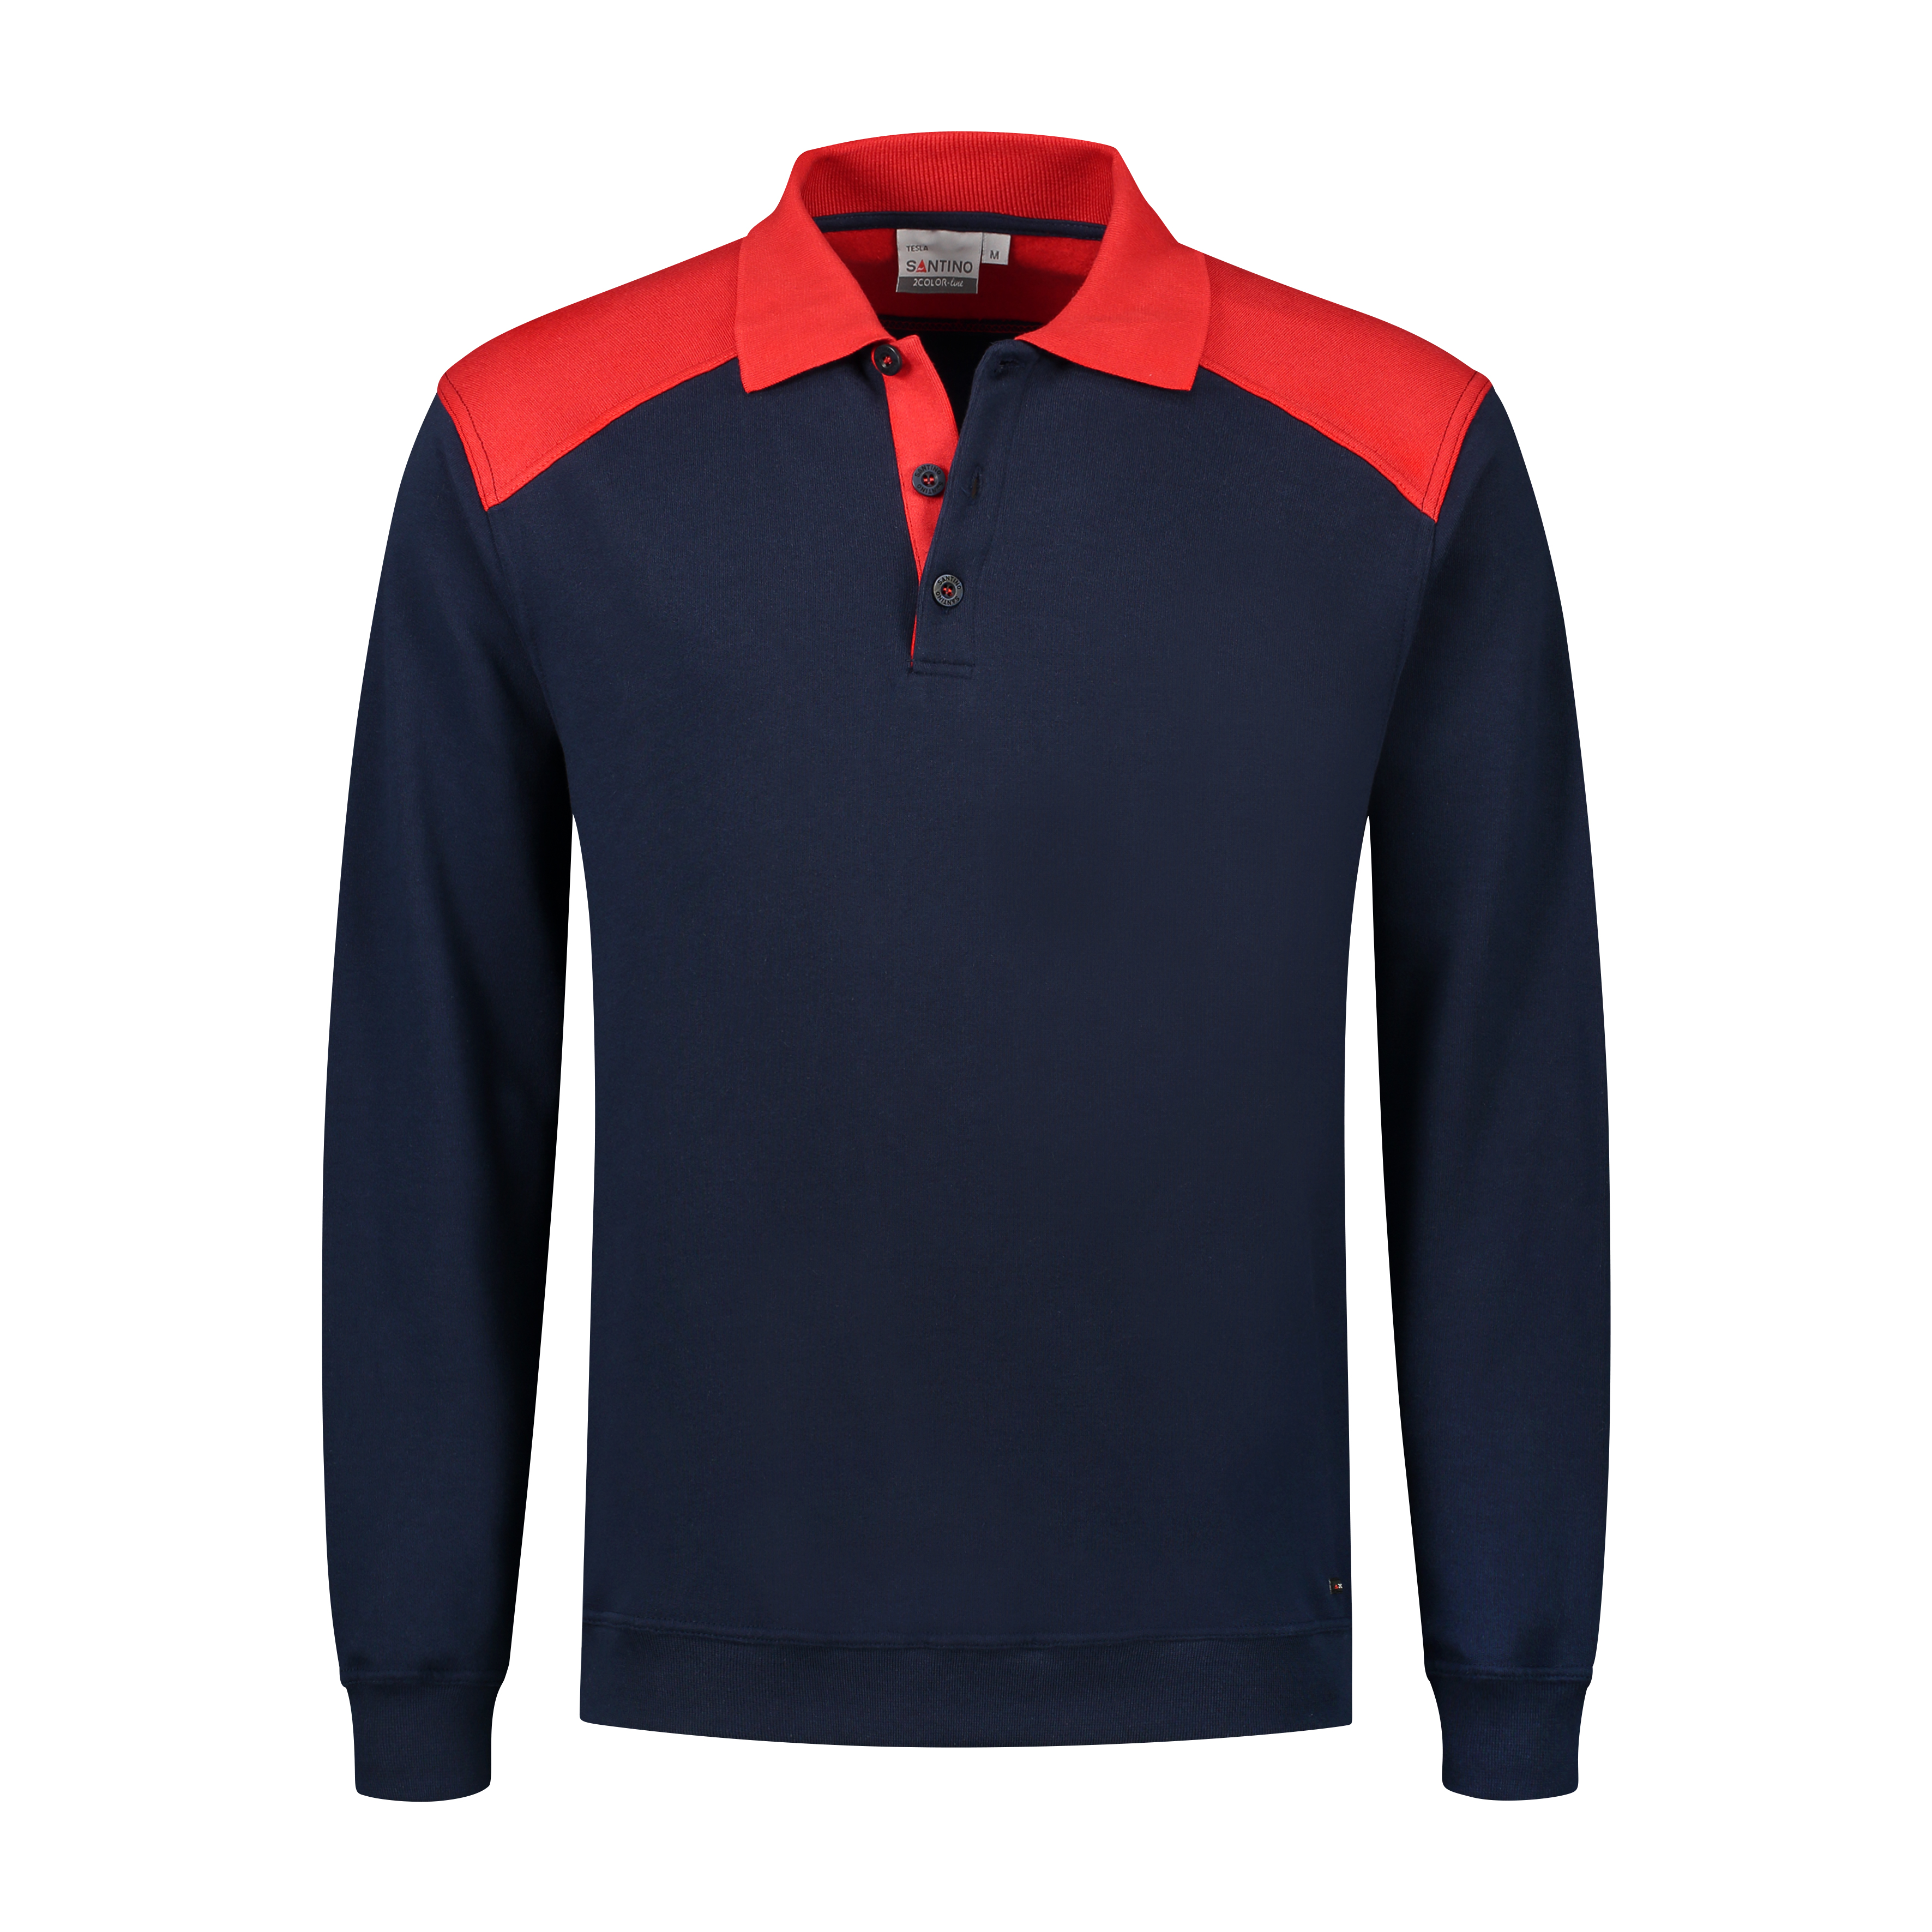 2-Color Polosweater TESLA - front